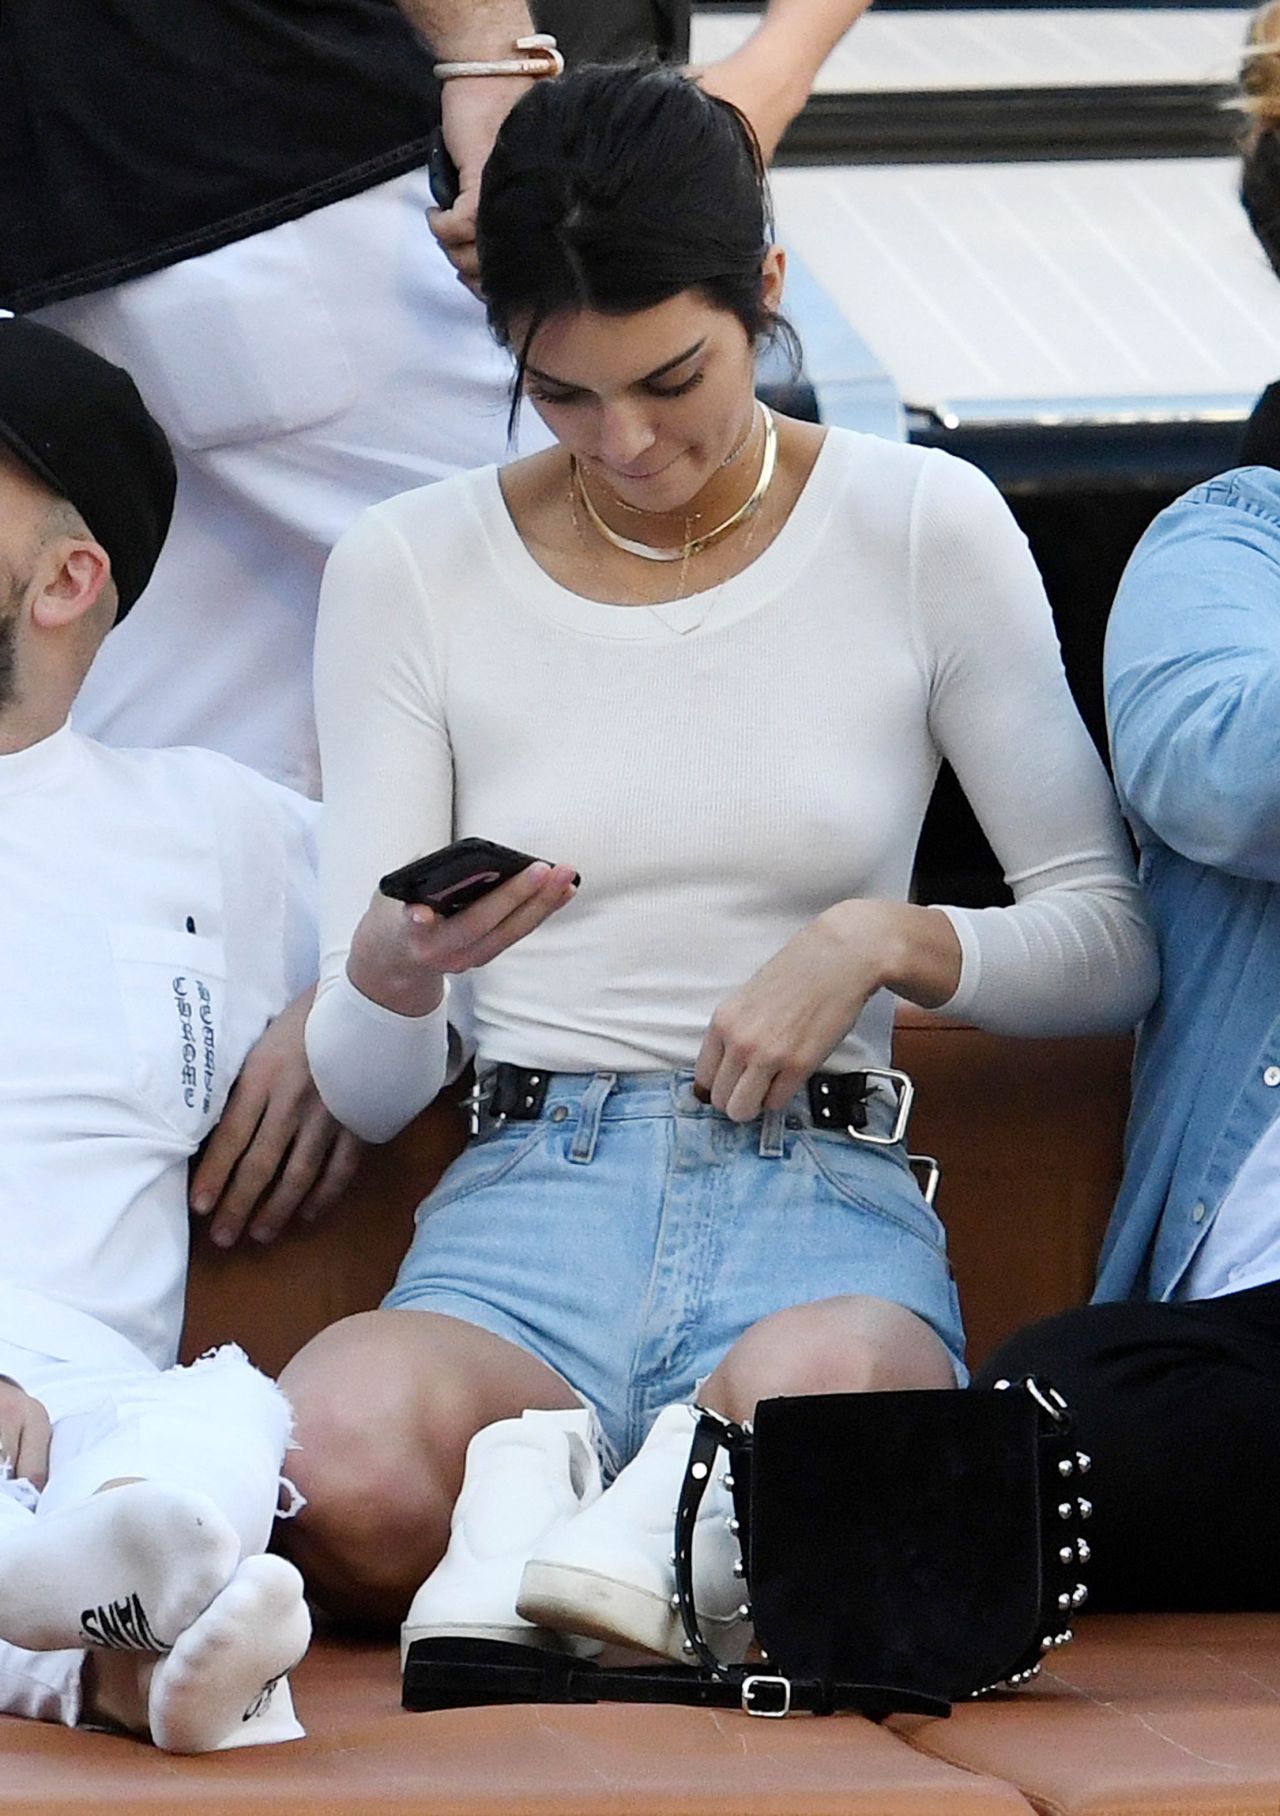 Kendall Jenner in Jeans Shorts On a Boat in Miami 12/03/ 2016